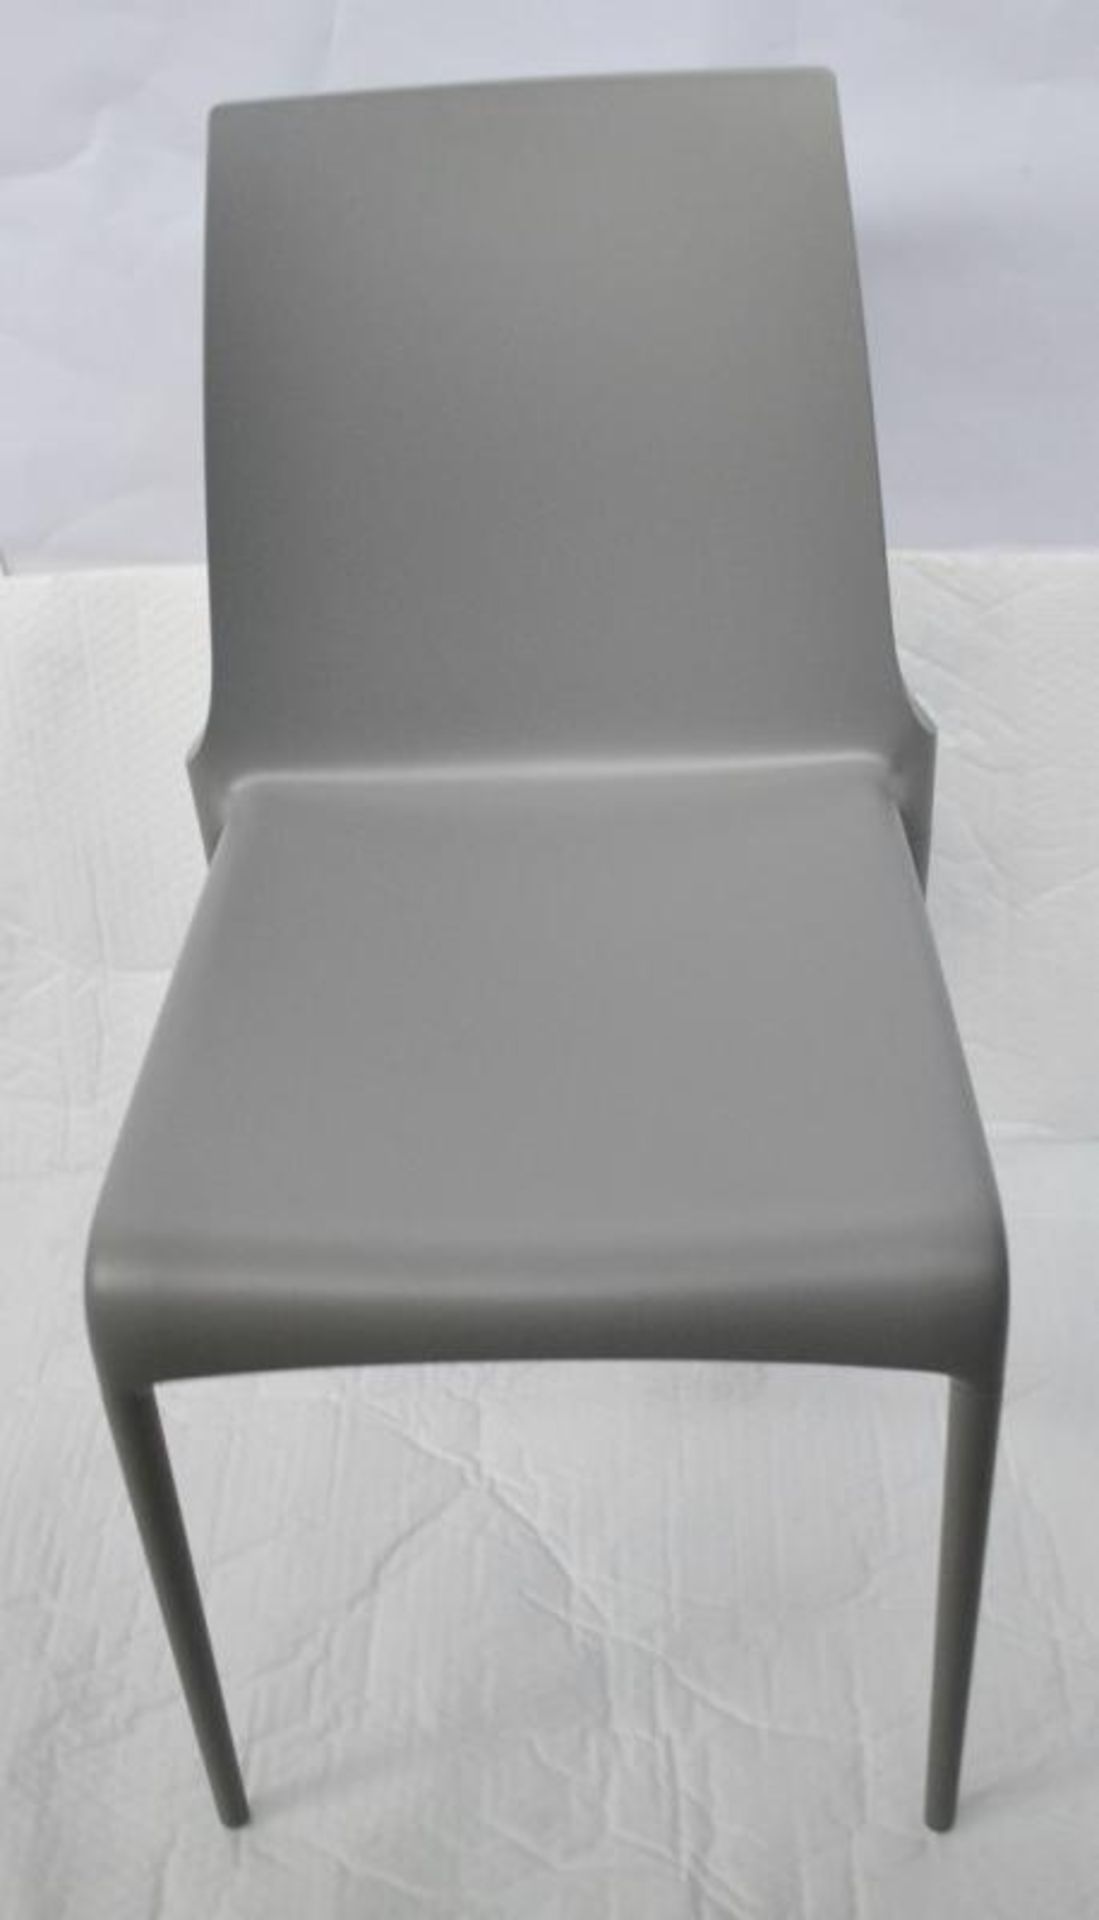 2 x LIGNE ROSET "Petra" Stackable Dining Chairs - Dimensions: W42 x D45 x H83, Seat Height: 46cm - R - Image 9 of 16